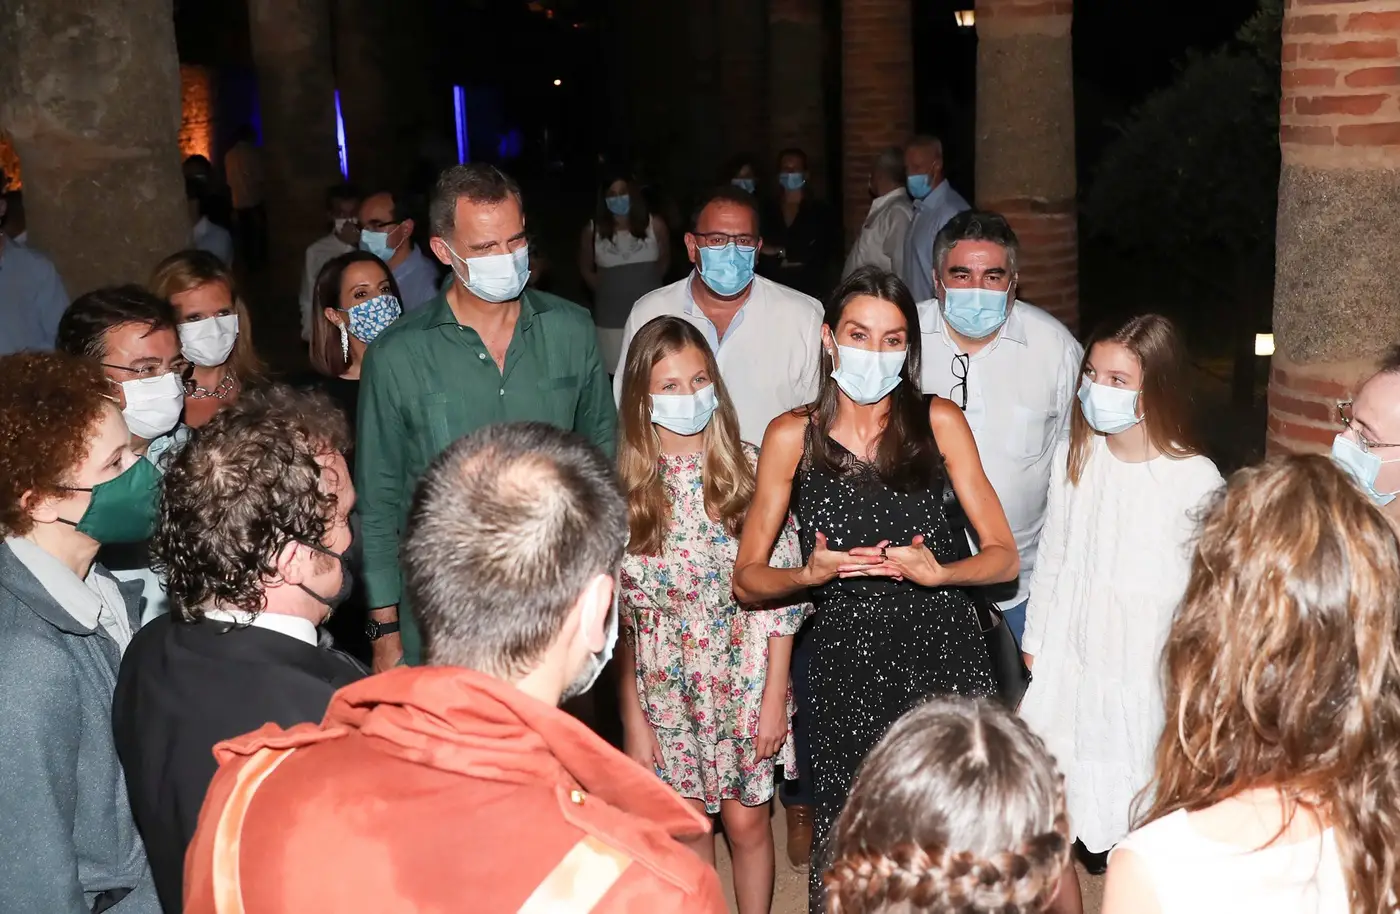 Queen Letizia and King Felipe met with the actors at the National Museum of Roman Art in Mérida